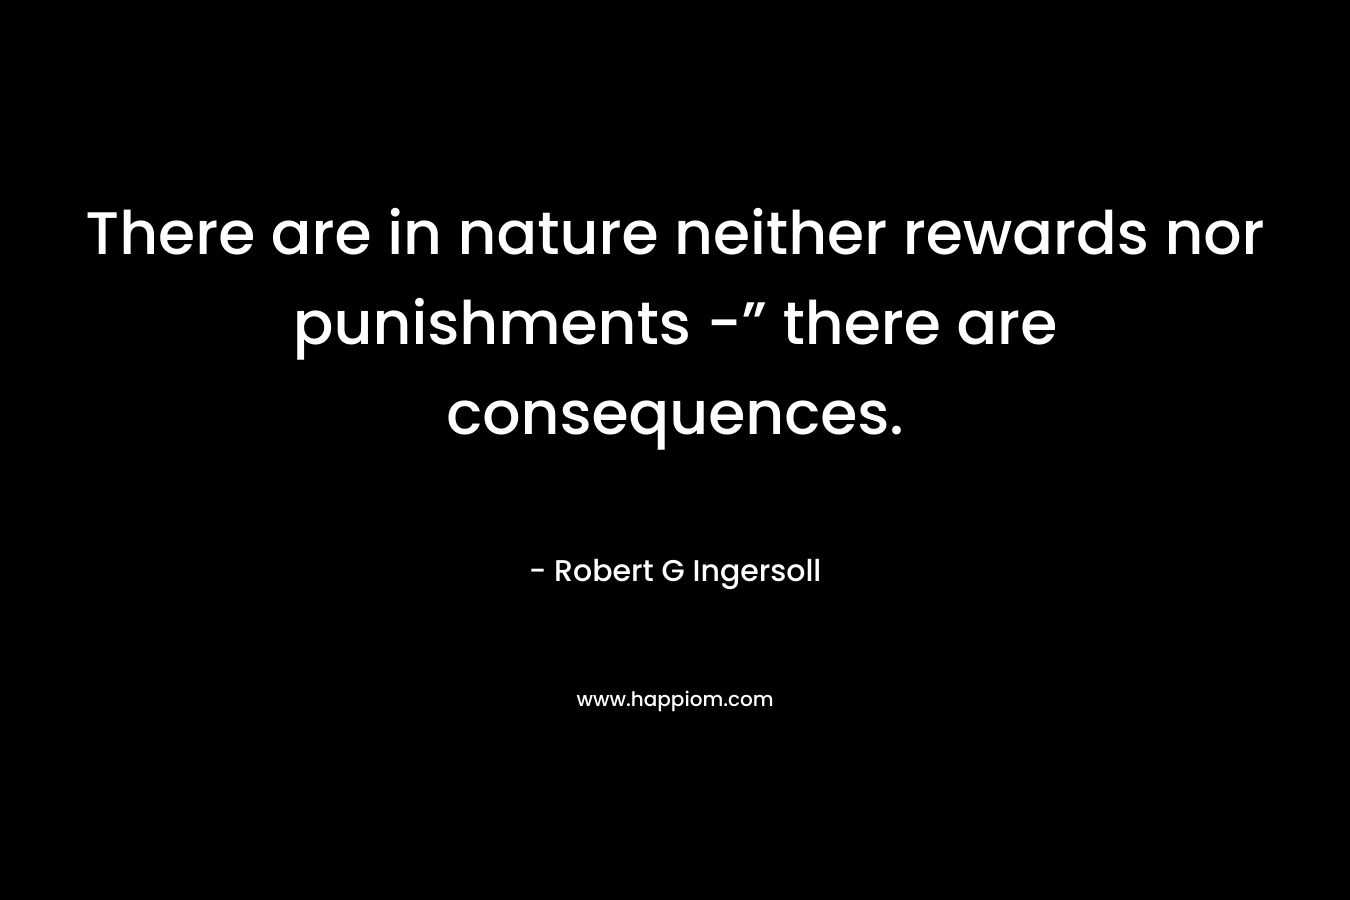 There are in nature neither rewards nor punishments -” there are consequences.